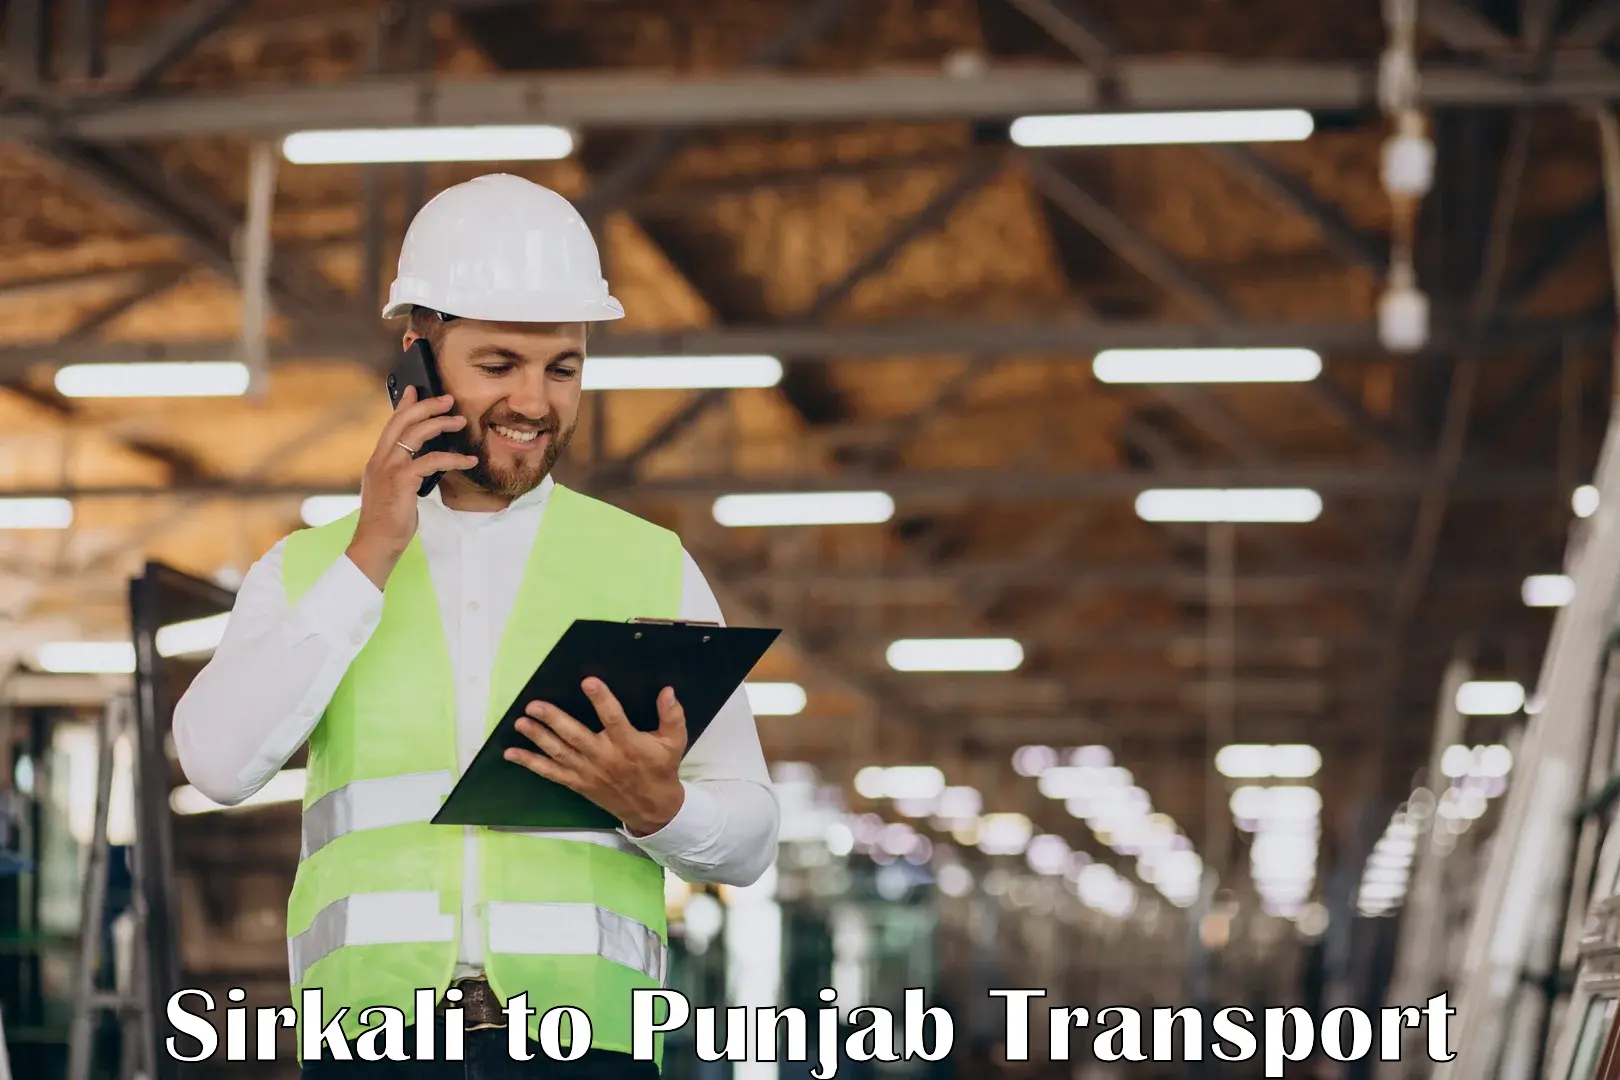 Express transport services in Sirkali to Mohali